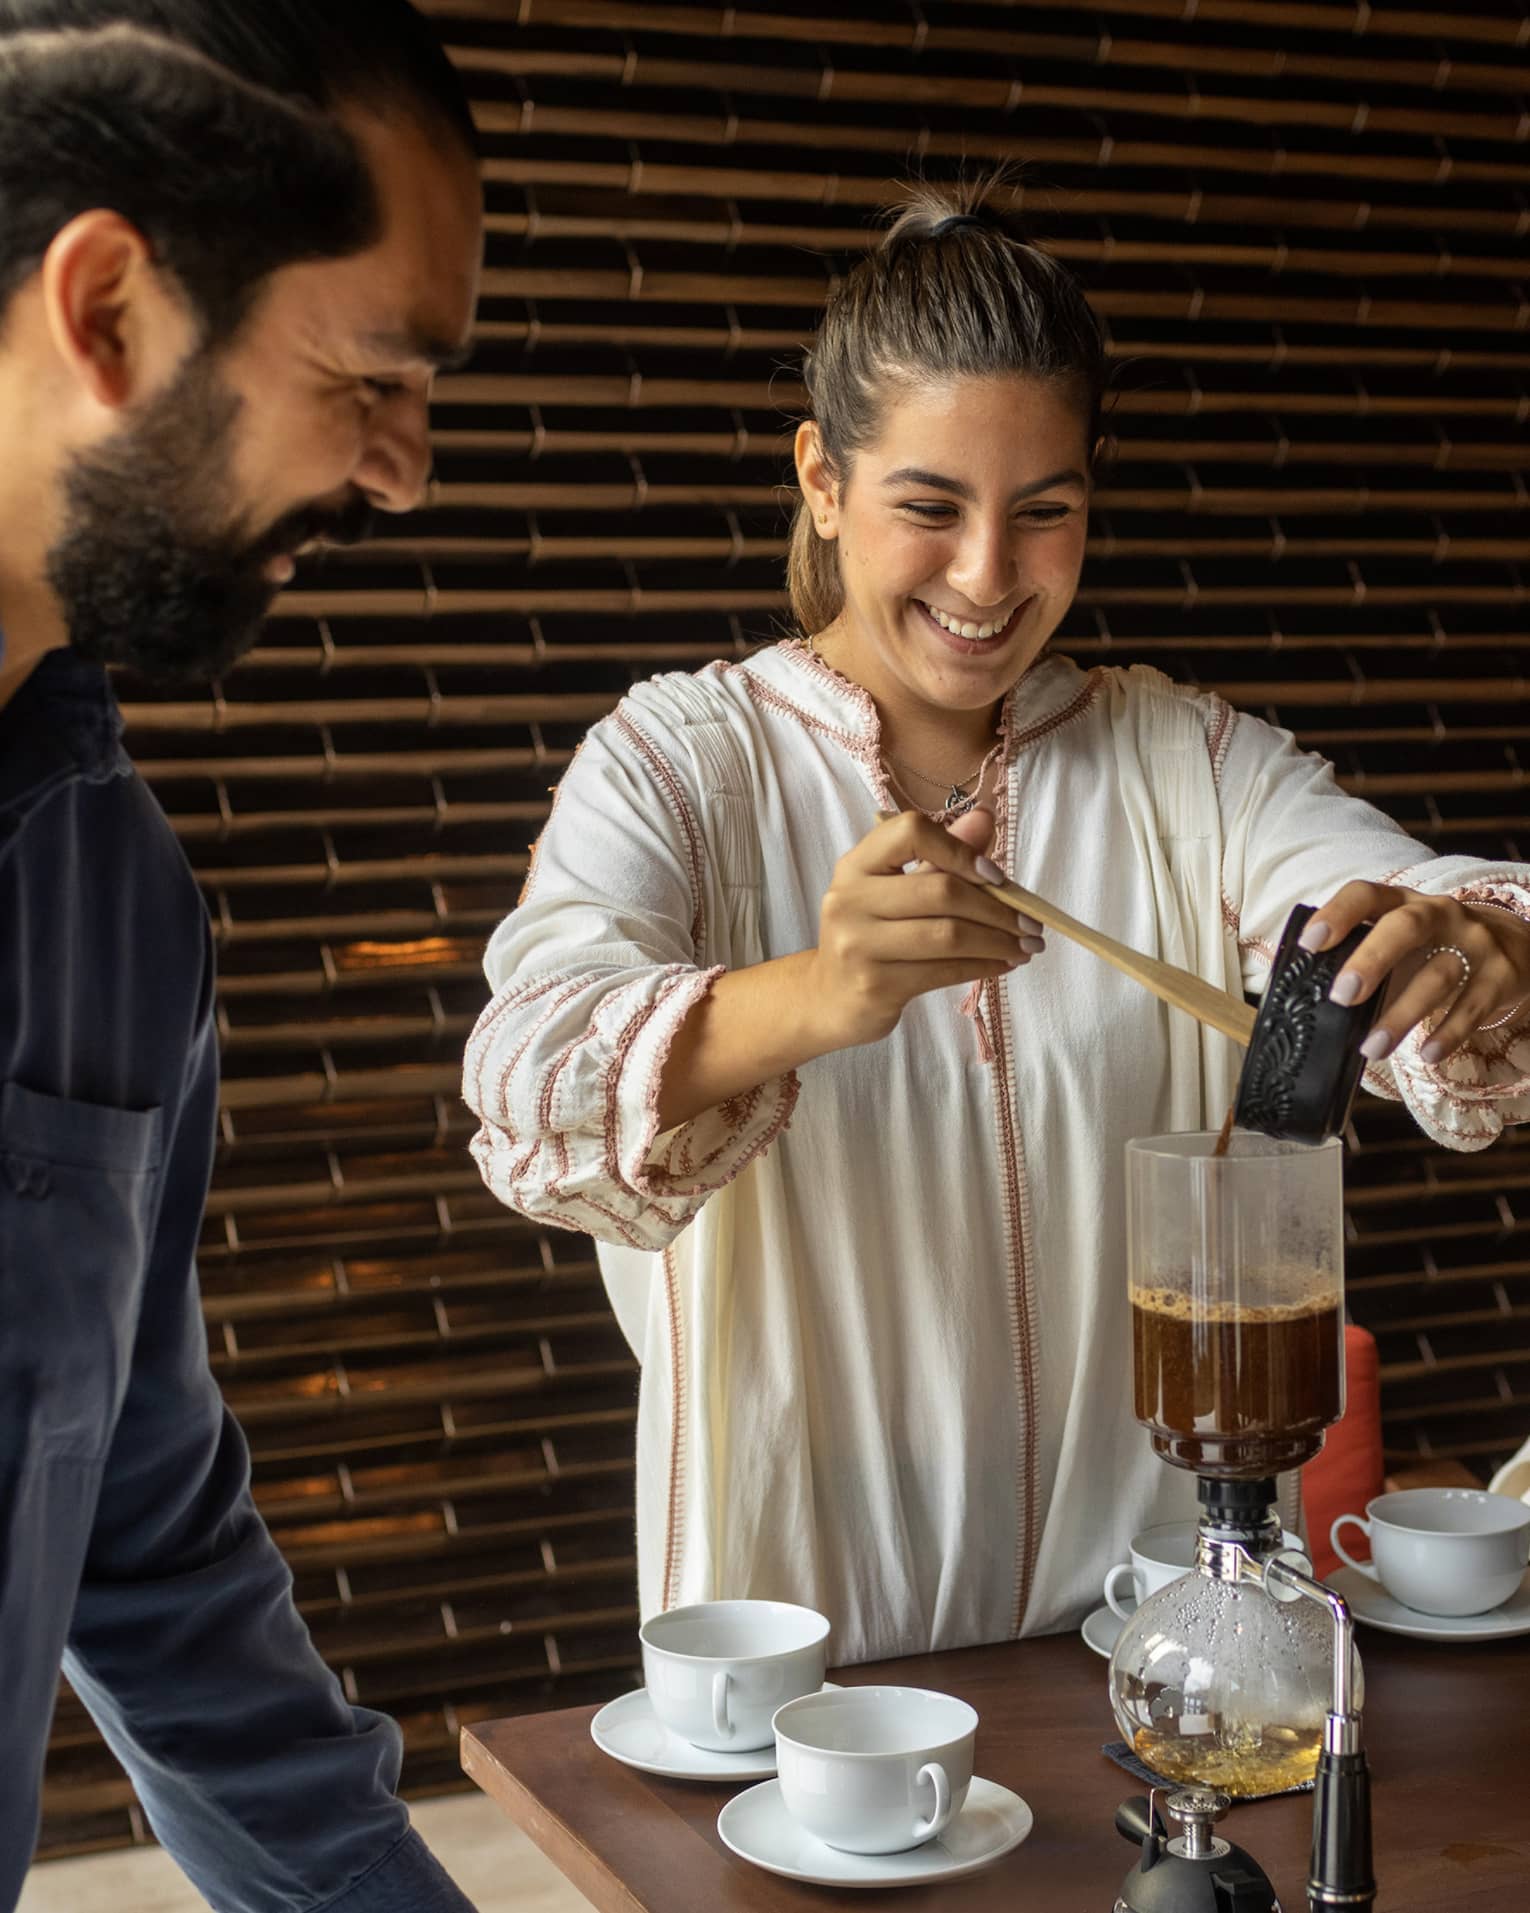 Two women and a man making coffee.